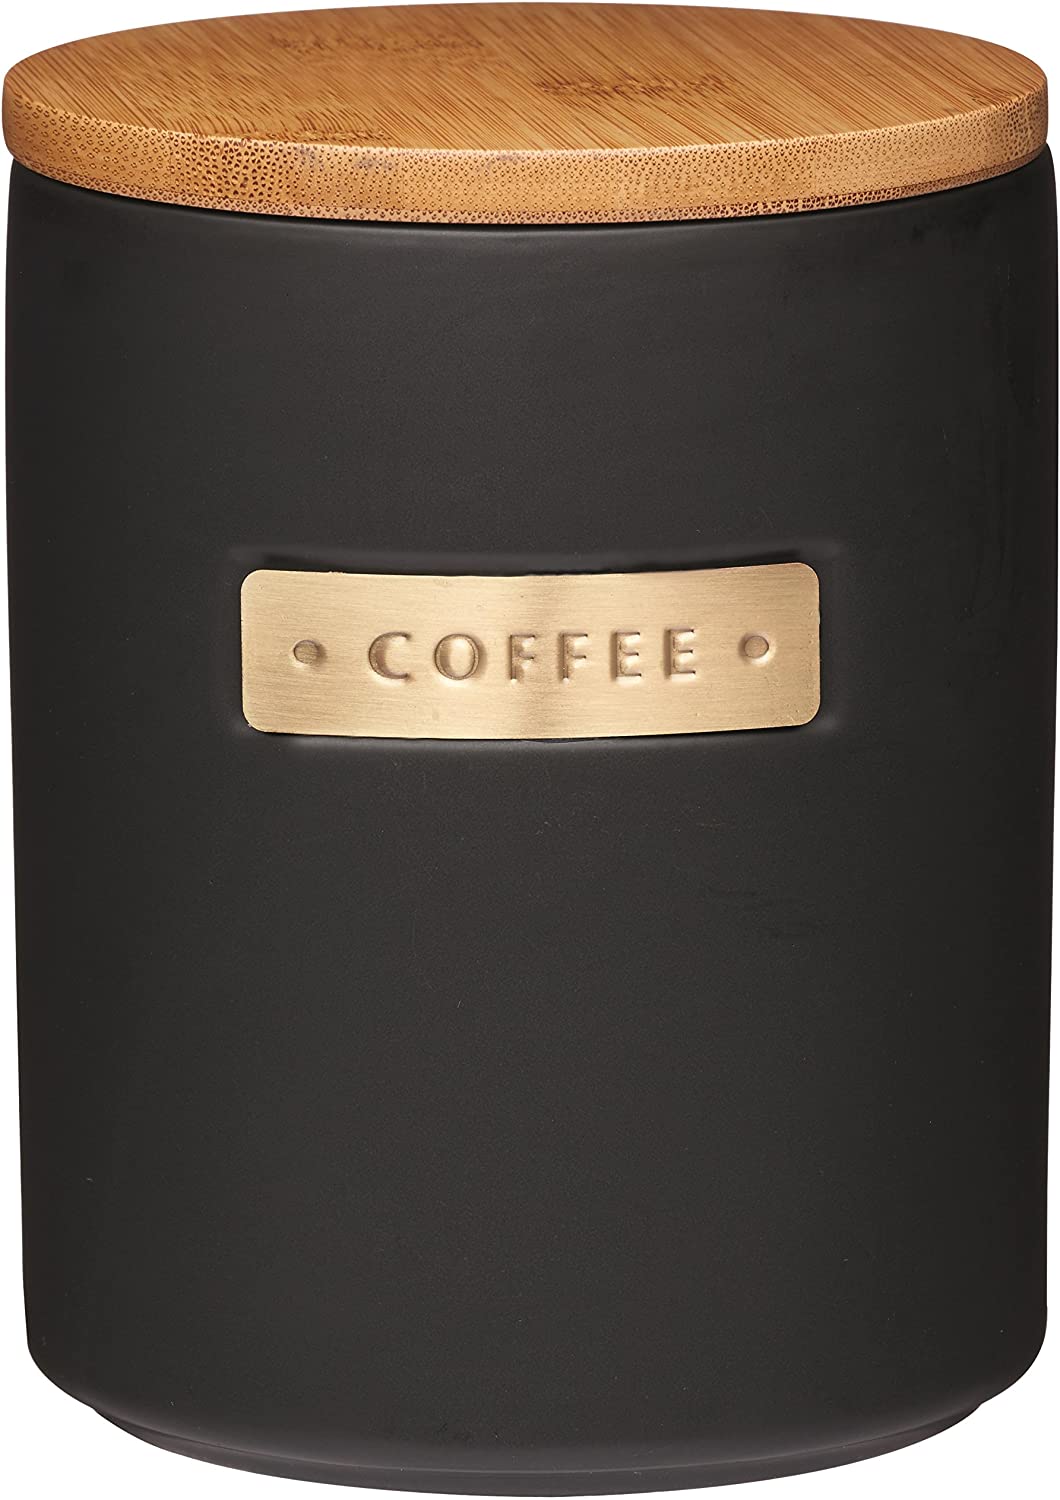 Master Class High Quality Earthenware Tin with Brass Emblem with Bamboo Airtight Lid